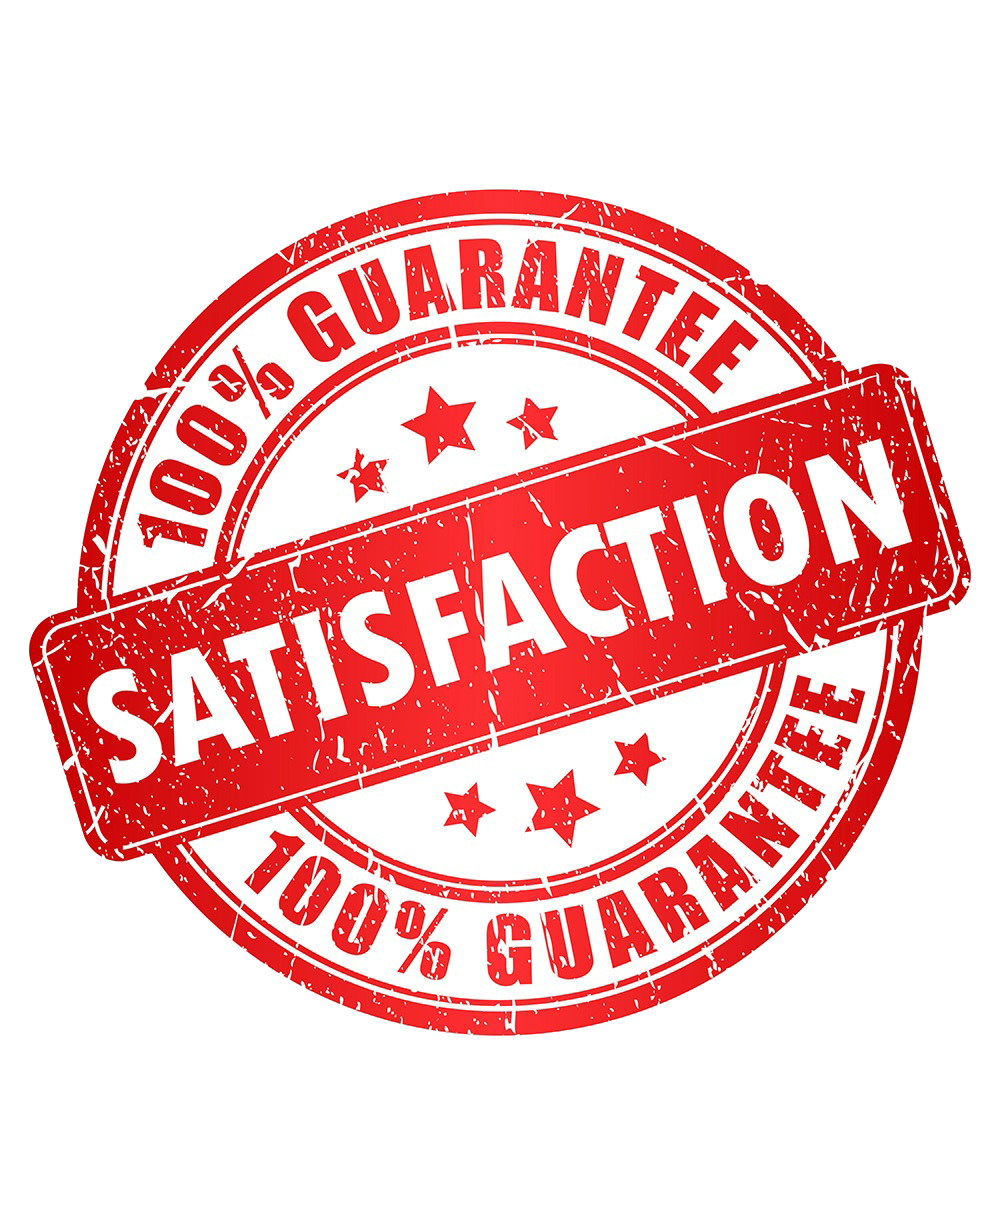 one hundred percent satisfaction guarantee stamp